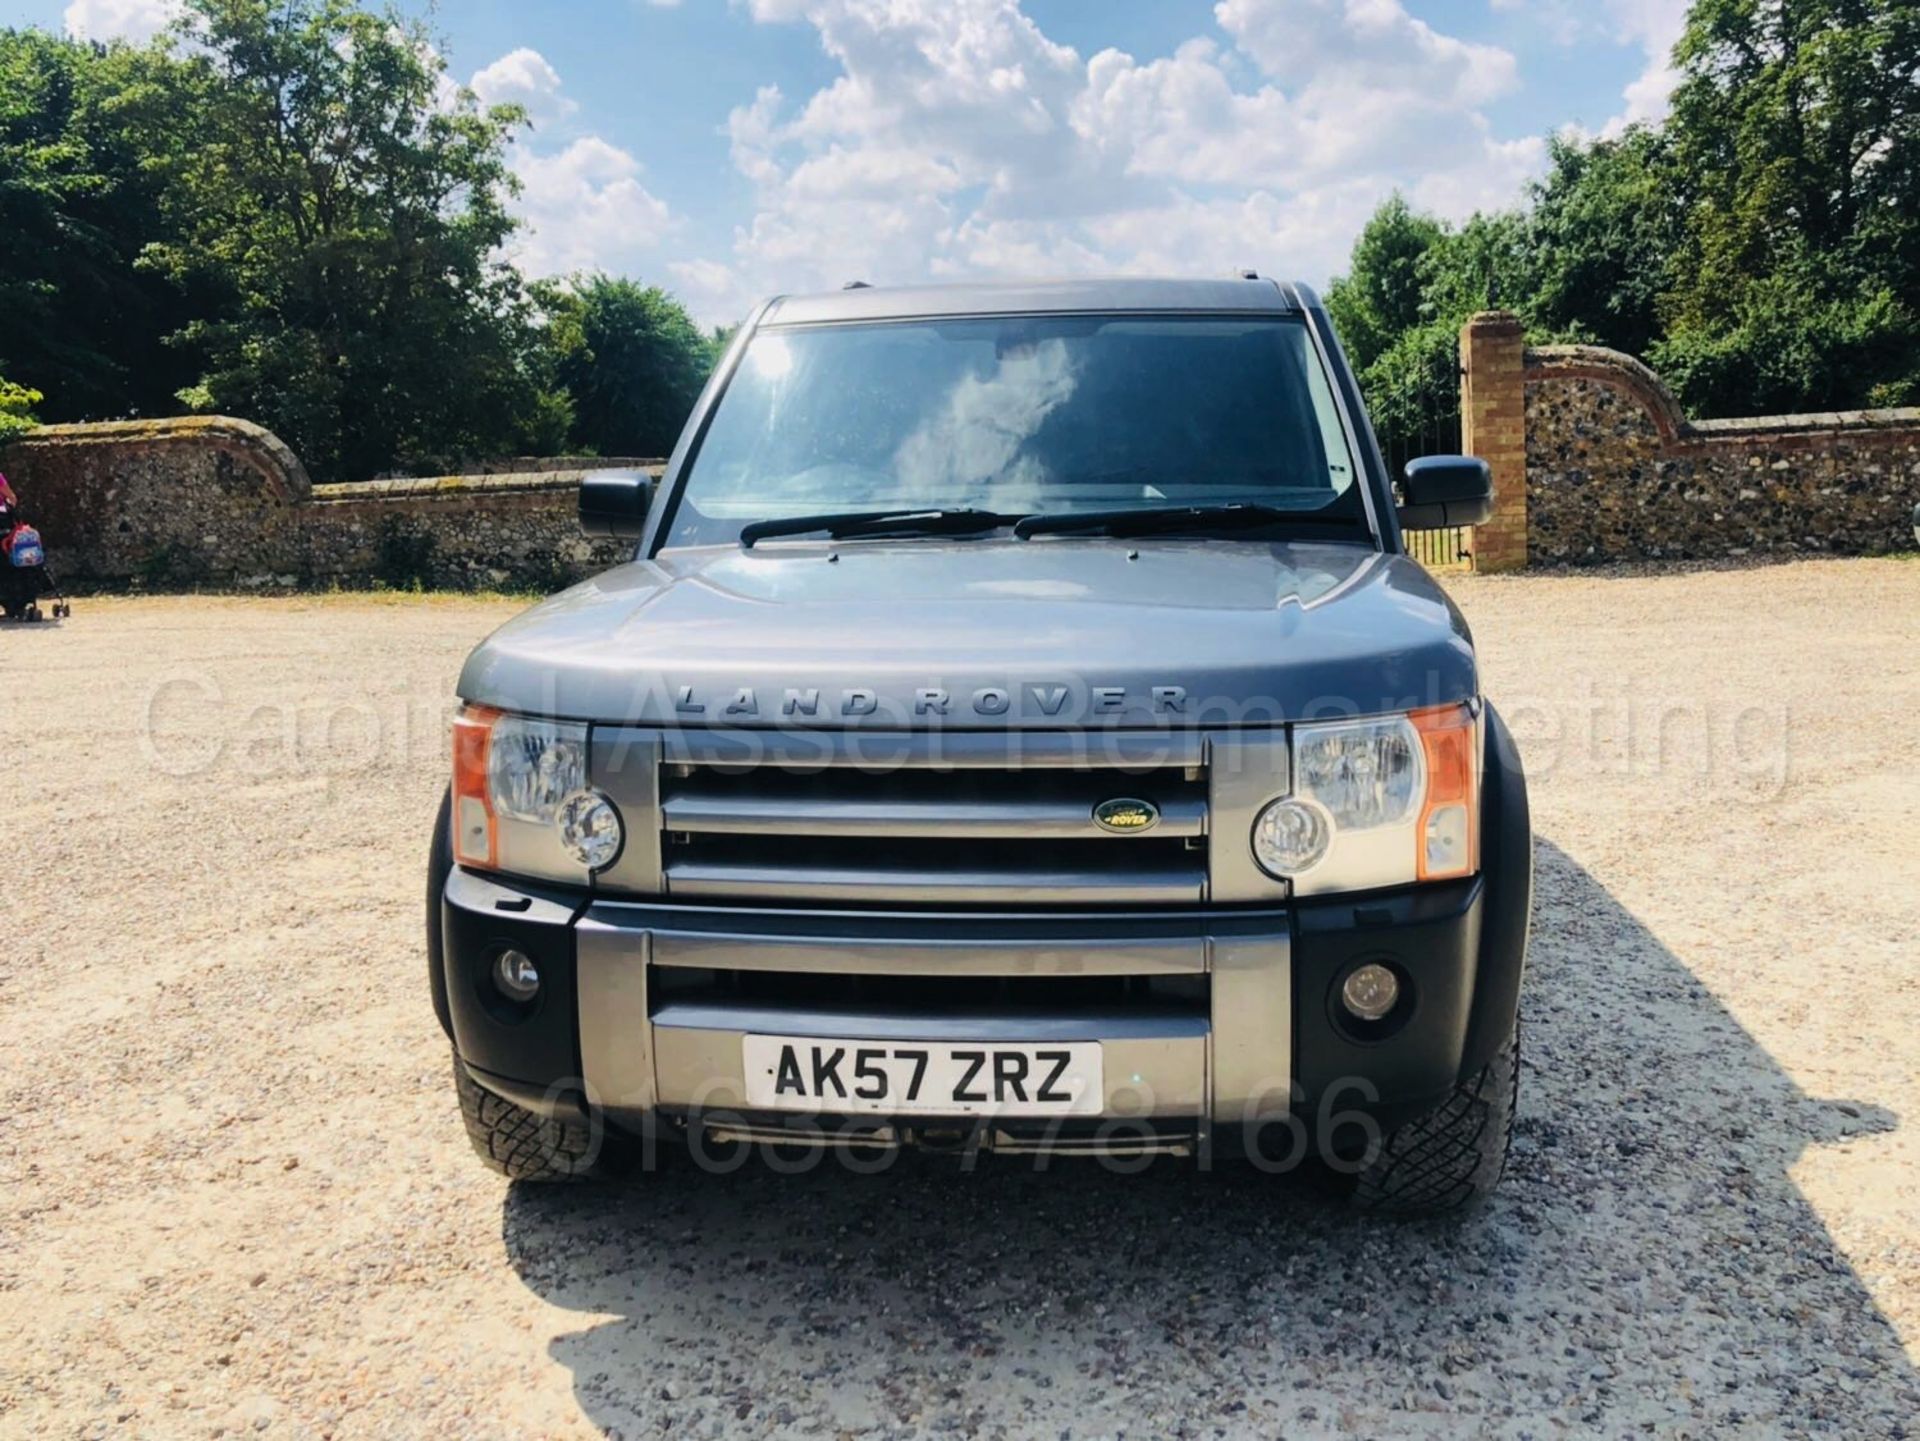 (On Sale) LAND ROVER DISCOVERY 3 'XS EDITION' **COMMERCIAL VAN**(2008 MODEL) 'TDV6-190 BHP' (NO VAT) - Image 2 of 37